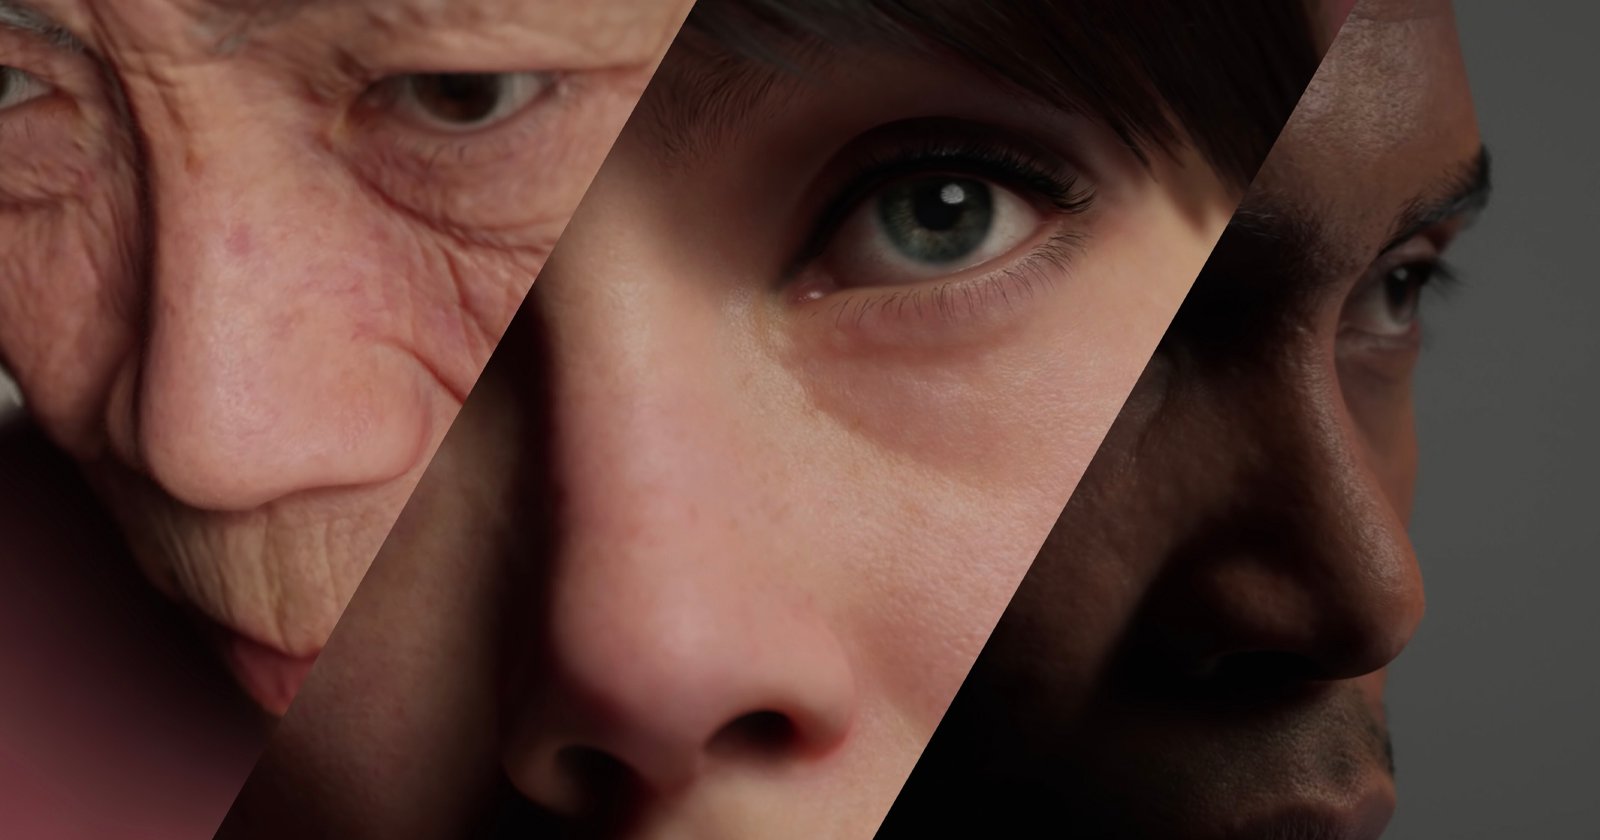 MetaHumans allows you to create ultra-realistic digital human beings in minutes